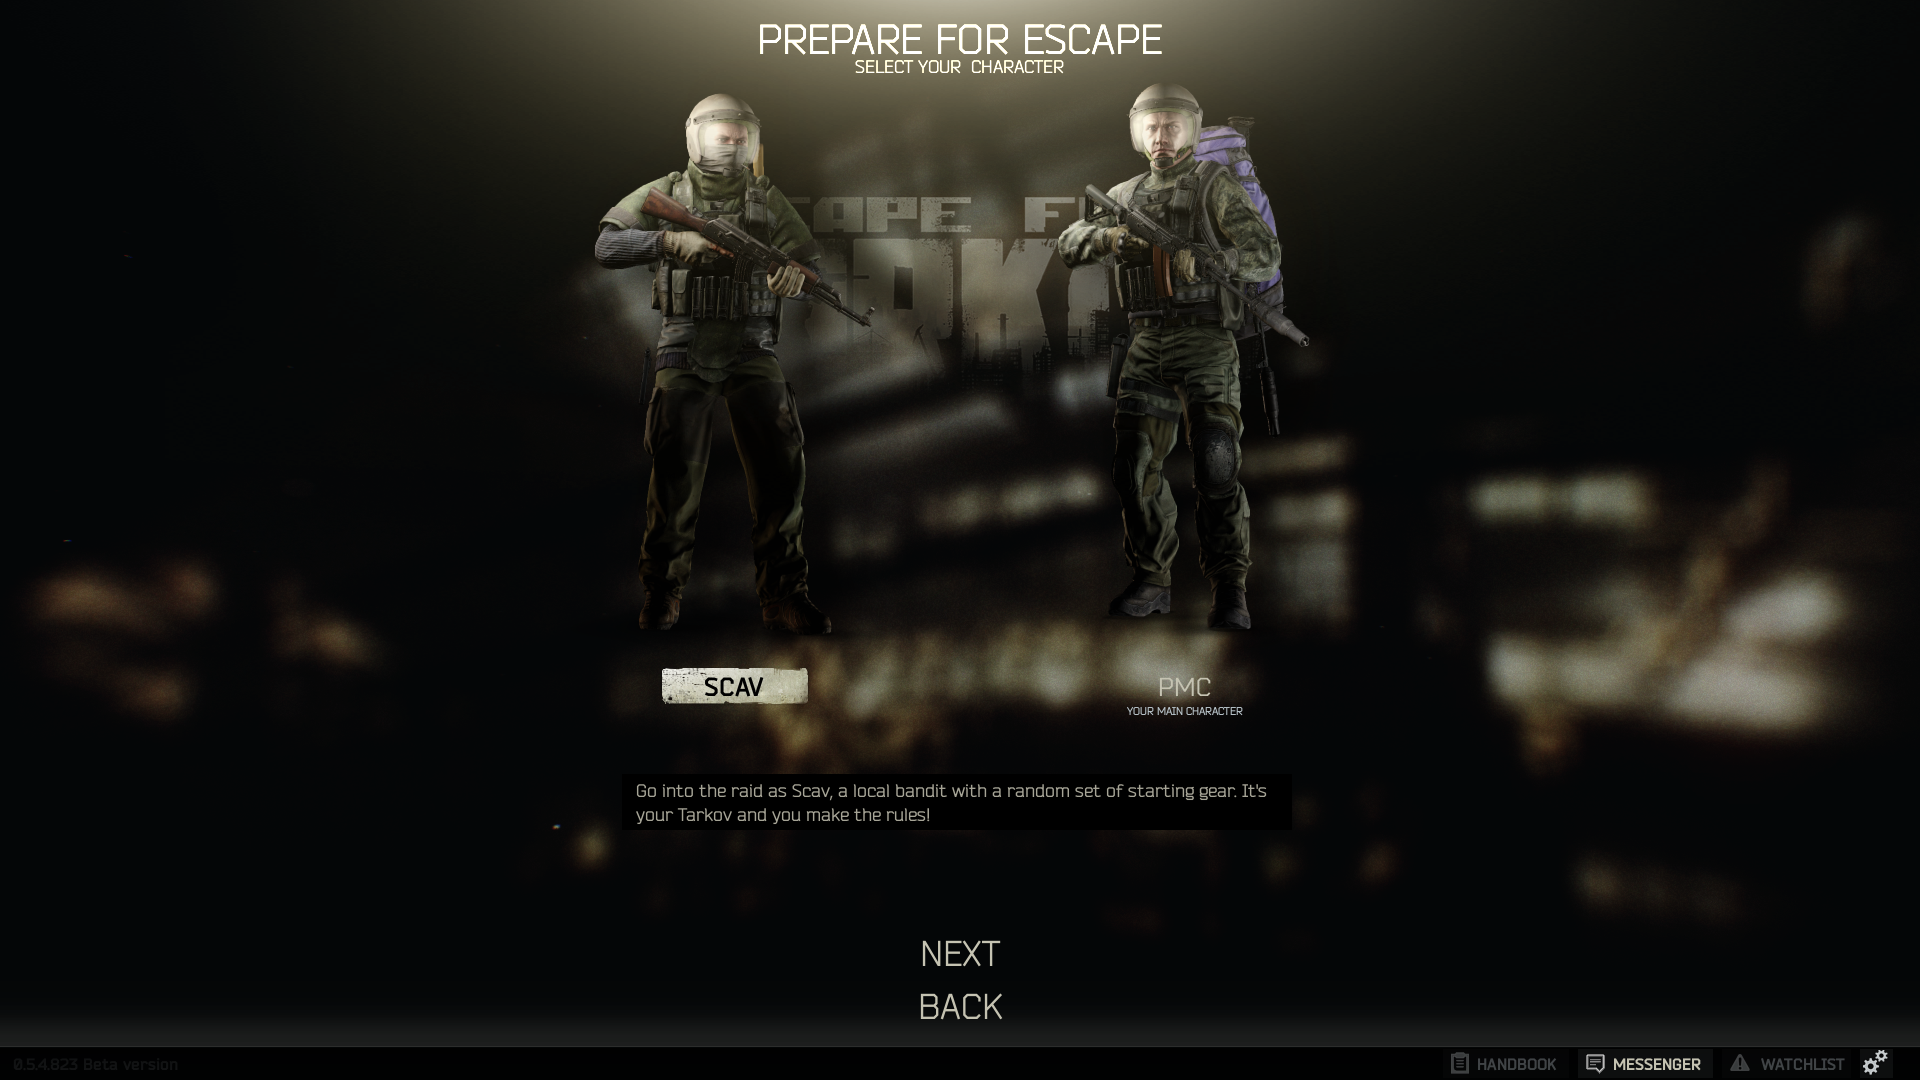 scav and pmc